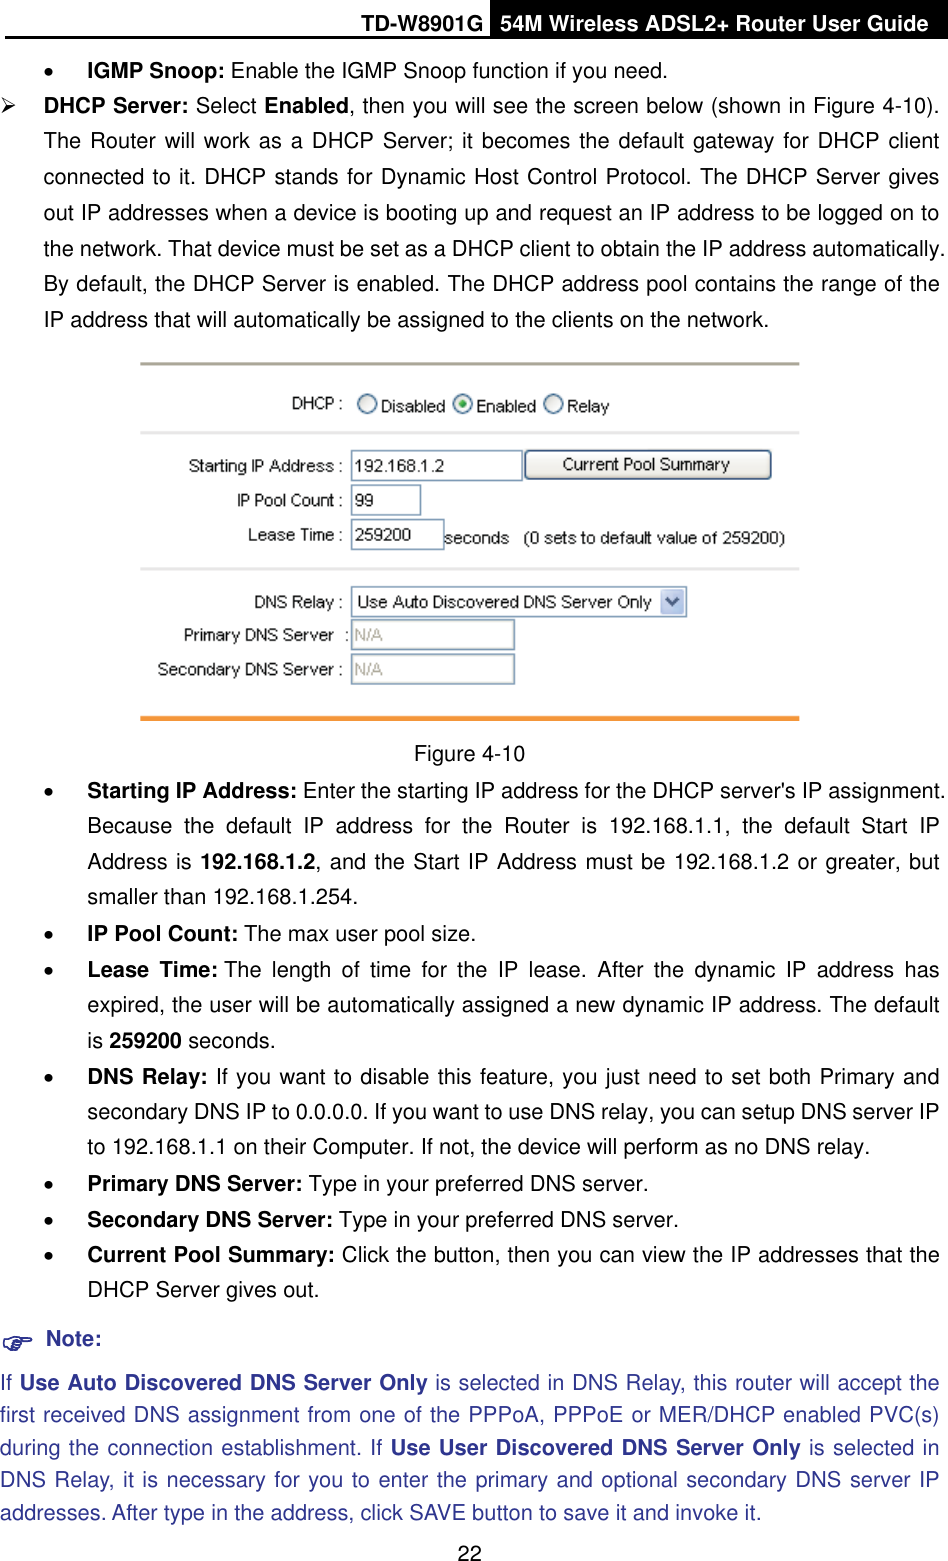 TD-W8901G 54M Wireless ADSL2+ Router User Guide22xIGMP Snoop: Enable the IGMP Snoop function if you need. ¾DHCP Server: Select Enabled, then you will see the screen below (shown in Figure 4-10). The Router will work as a DHCP Server; it becomes the default gateway for DHCP client connected to it. DHCP stands for Dynamic Host Control Protocol. The DHCP Server gives out IP addresses when a device is booting up and request an IP address to be logged on to the network. That device must be set as a DHCP client to obtain the IP address automatically. By default, the DHCP Server is enabled. The DHCP address pool contains the range of the IP address that will automatically be assigned to the clients on the network.   Figure 4-10 xStarting IP Address: Enter the starting IP address for the DHCP server&apos;s IP assignment. Because the default IP address for the Router is 192.168.1.1, the default Start IP Address is 192.168.1.2, and the Start IP Address must be 192.168.1.2 or greater, but smaller than 192.168.1.254. xIP Pool Count: The max user pool size. xLease Time: The length of time for the IP lease. After the dynamic IP address has expired, the user will be automatically assigned a new dynamic IP address. The default is 259200 seconds.xDNS Relay: If you want to disable this feature, you just need to set both Primary and secondary DNS IP to 0.0.0.0. If you want to use DNS relay, you can setup DNS server IP to 192.168.1.1 on their Computer. If not, the device will perform as no DNS relay. xPrimary DNS Server: Type in your preferred DNS server. xSecondary DNS Server: Type in your preferred DNS server.xCurrent Pool Summary: Click the button, then you can view the IP addresses that the DHCP Server gives out.)Note:If Use Auto Discovered DNS Server Only is selected in DNS Relay, this router will accept the first received DNS assignment from one of the PPPoA, PPPoE or MER/DHCP enabled PVC(s) during the connection establishment. If Use User Discovered DNS Server Only is selected in DNS Relay, it is necessary for you to enter the primary and optional secondary DNS server IP addresses. After type in the address, click SAVE button to save it and invoke it.   